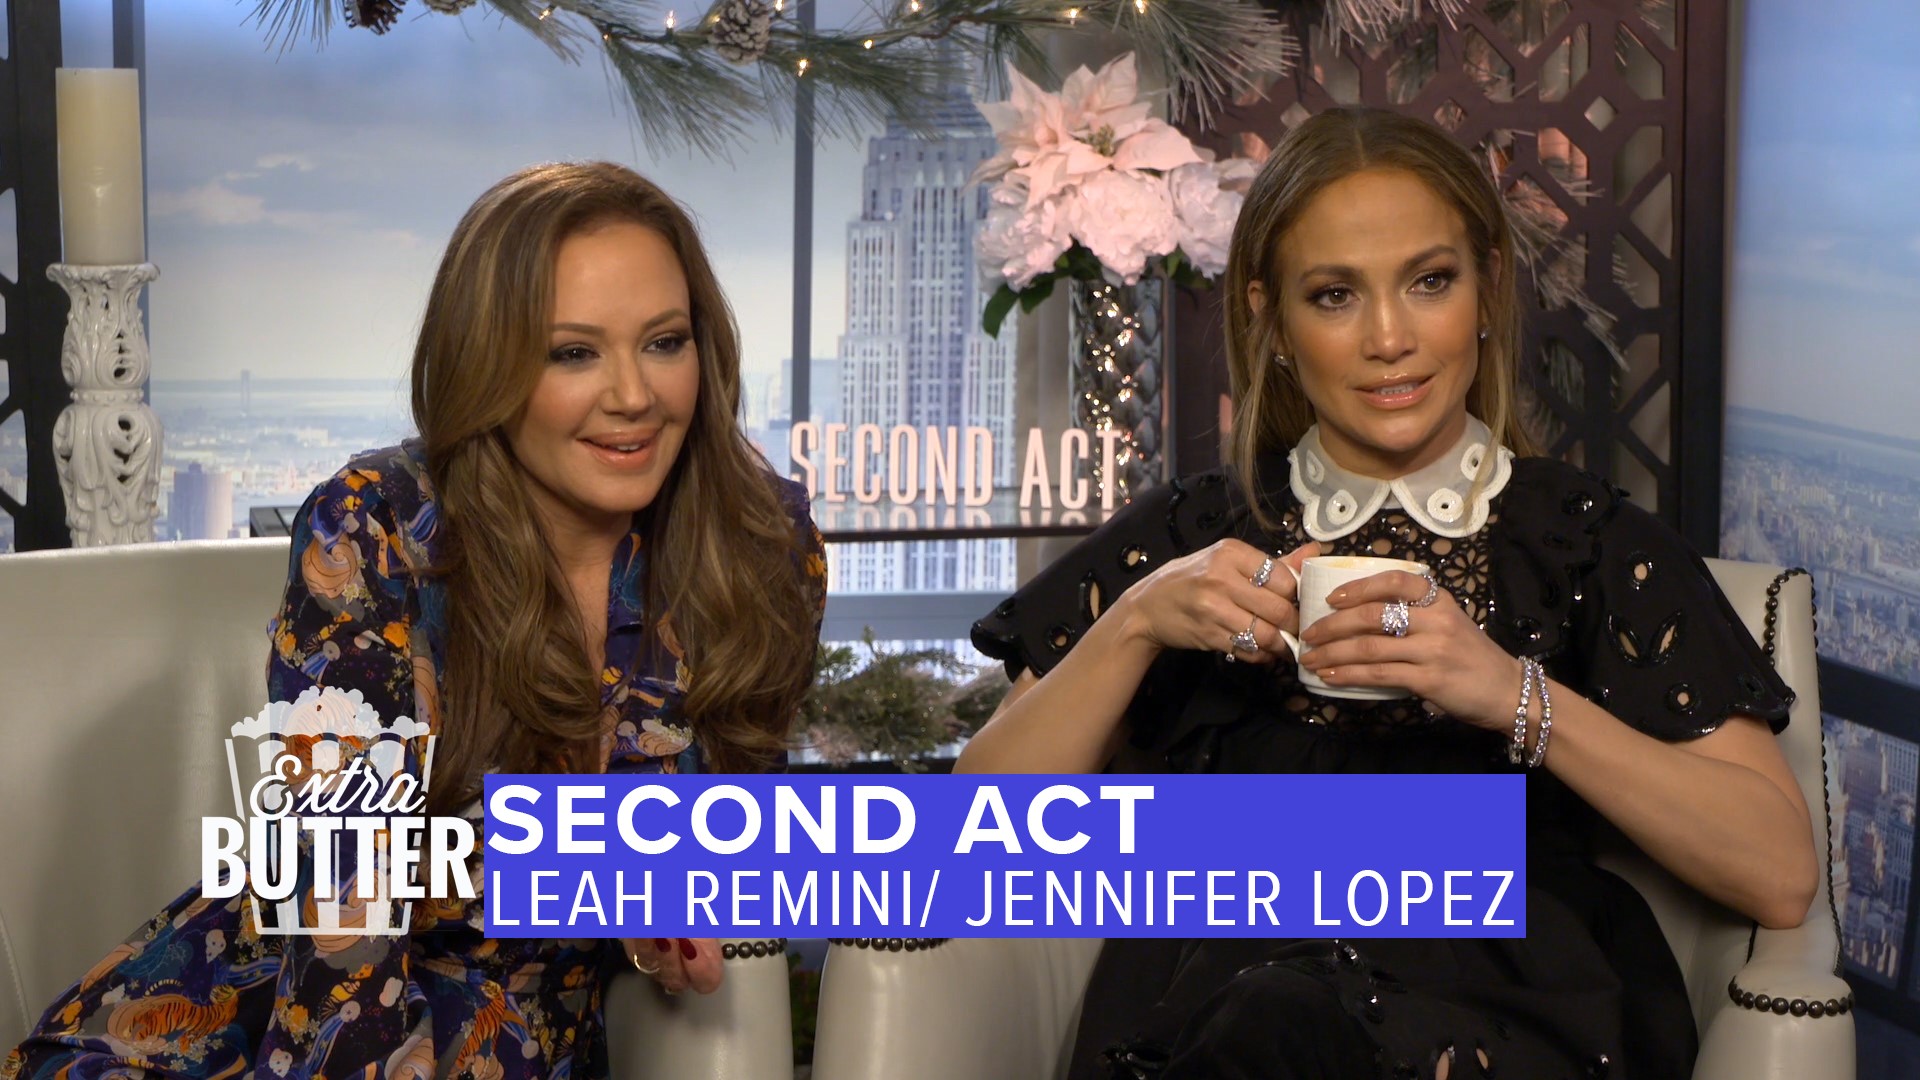 Jennifer Lopez and Leah Remini talk with Mark S. Allen about the new romantic comedy "Second Act." The two stars talk about how their real-life friendship helped shape their characters in the movie. Watch Extra Butter every Friday morning at 9:30 a.m. on ABC10. Interview provided by STX Films.